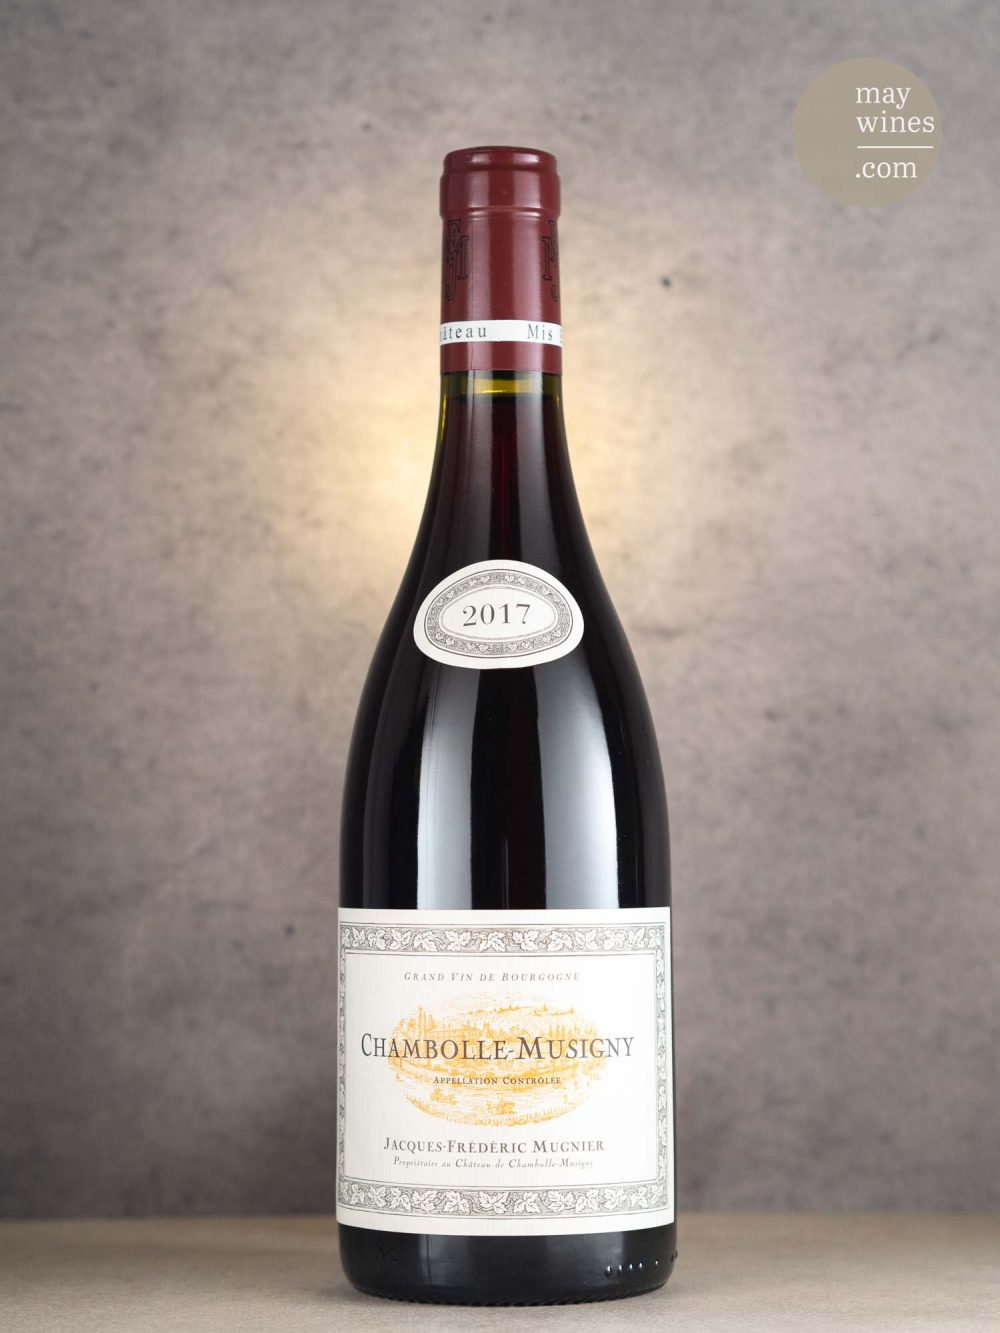 May Wines – Rotwein – 2017 Chambolle-Musigny AC - Jacques-Frédéric Mugnier